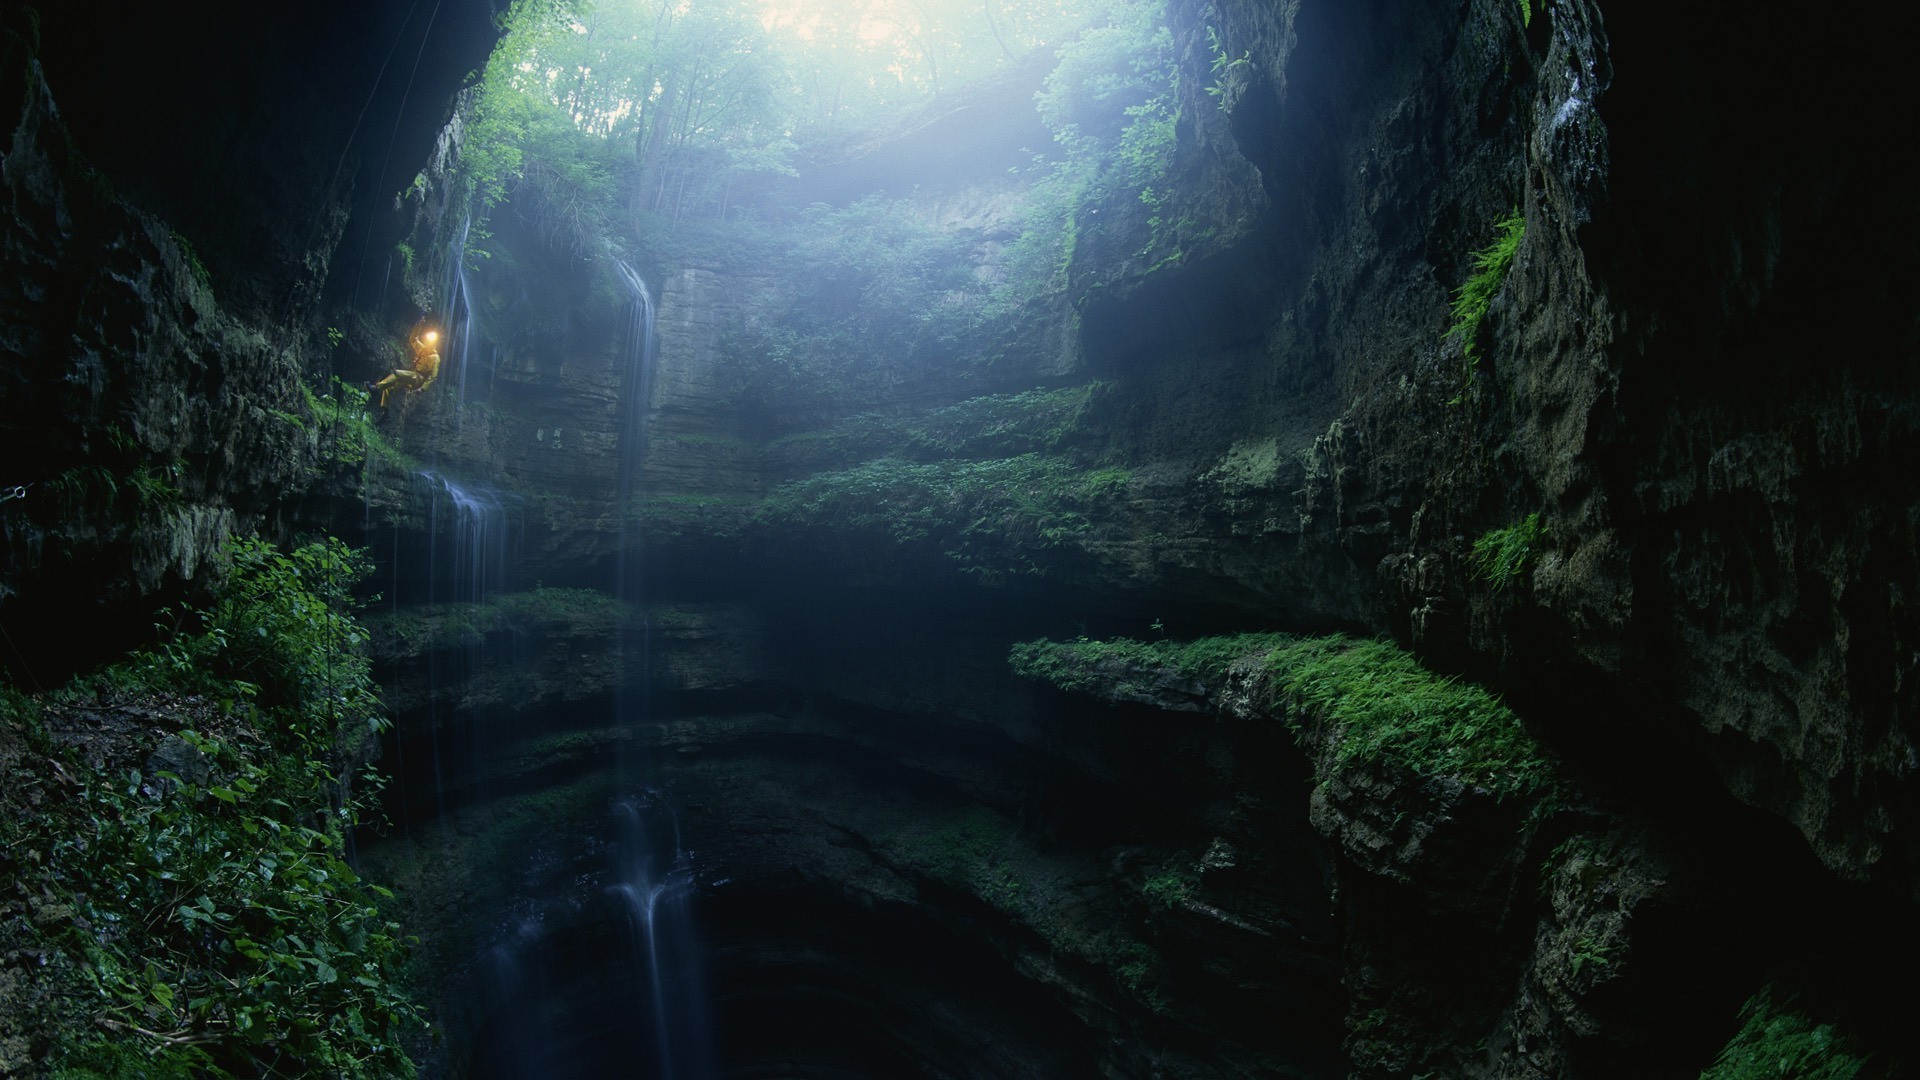 Cenote Wallpaper - Bing images